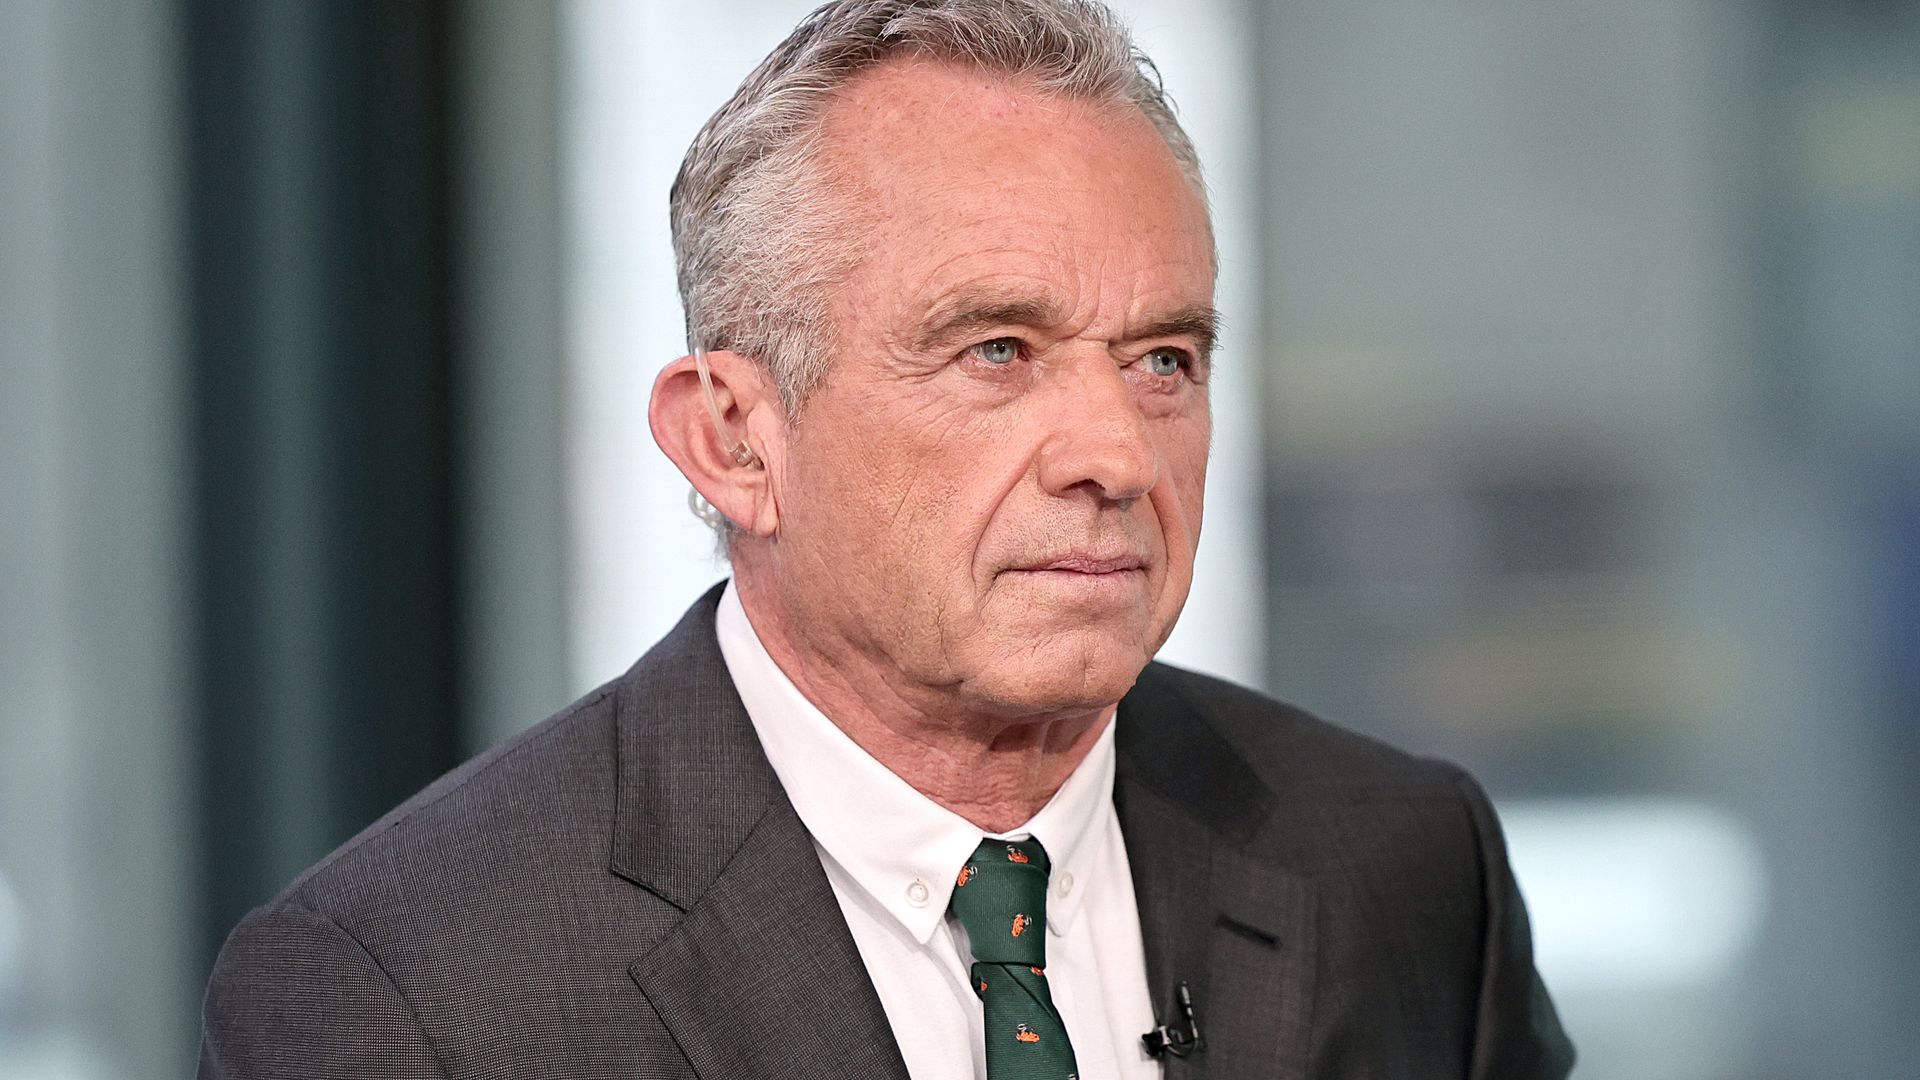 Democrats are doing whatever they can to block RFK Jr.'s third-party candidacy to support Biden in the 2024 presidential election.